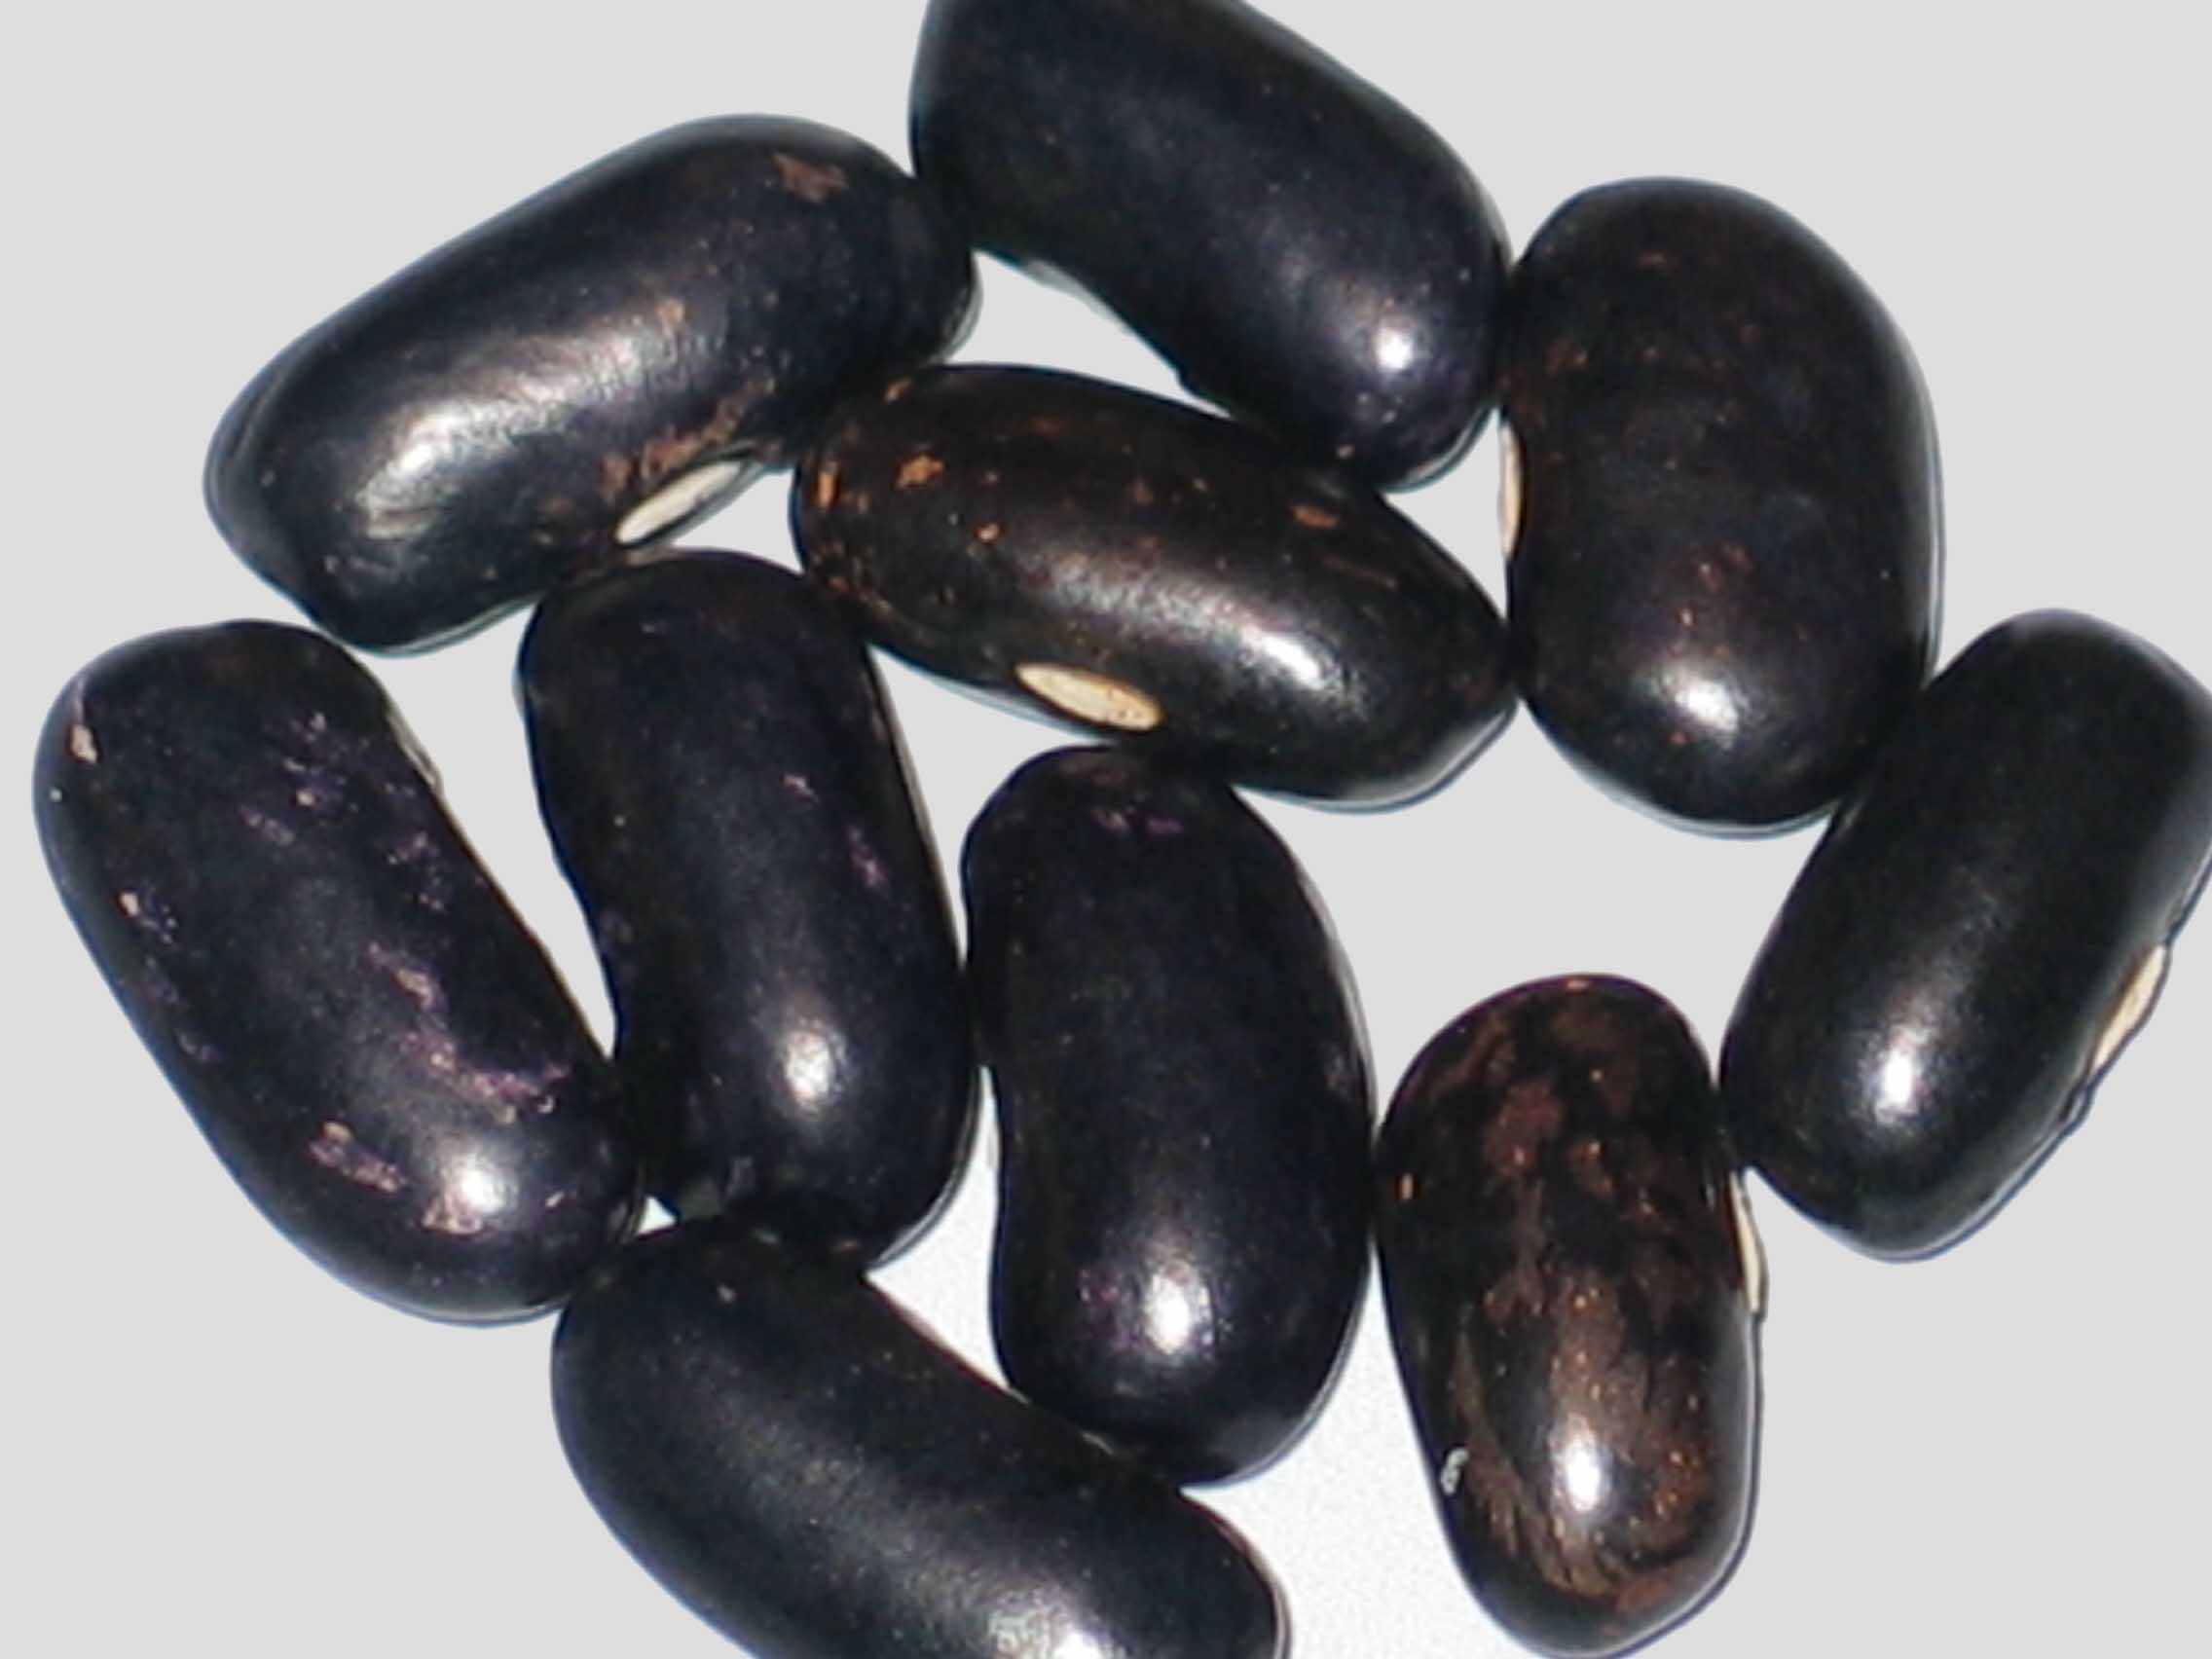 image of Kings Knight beans